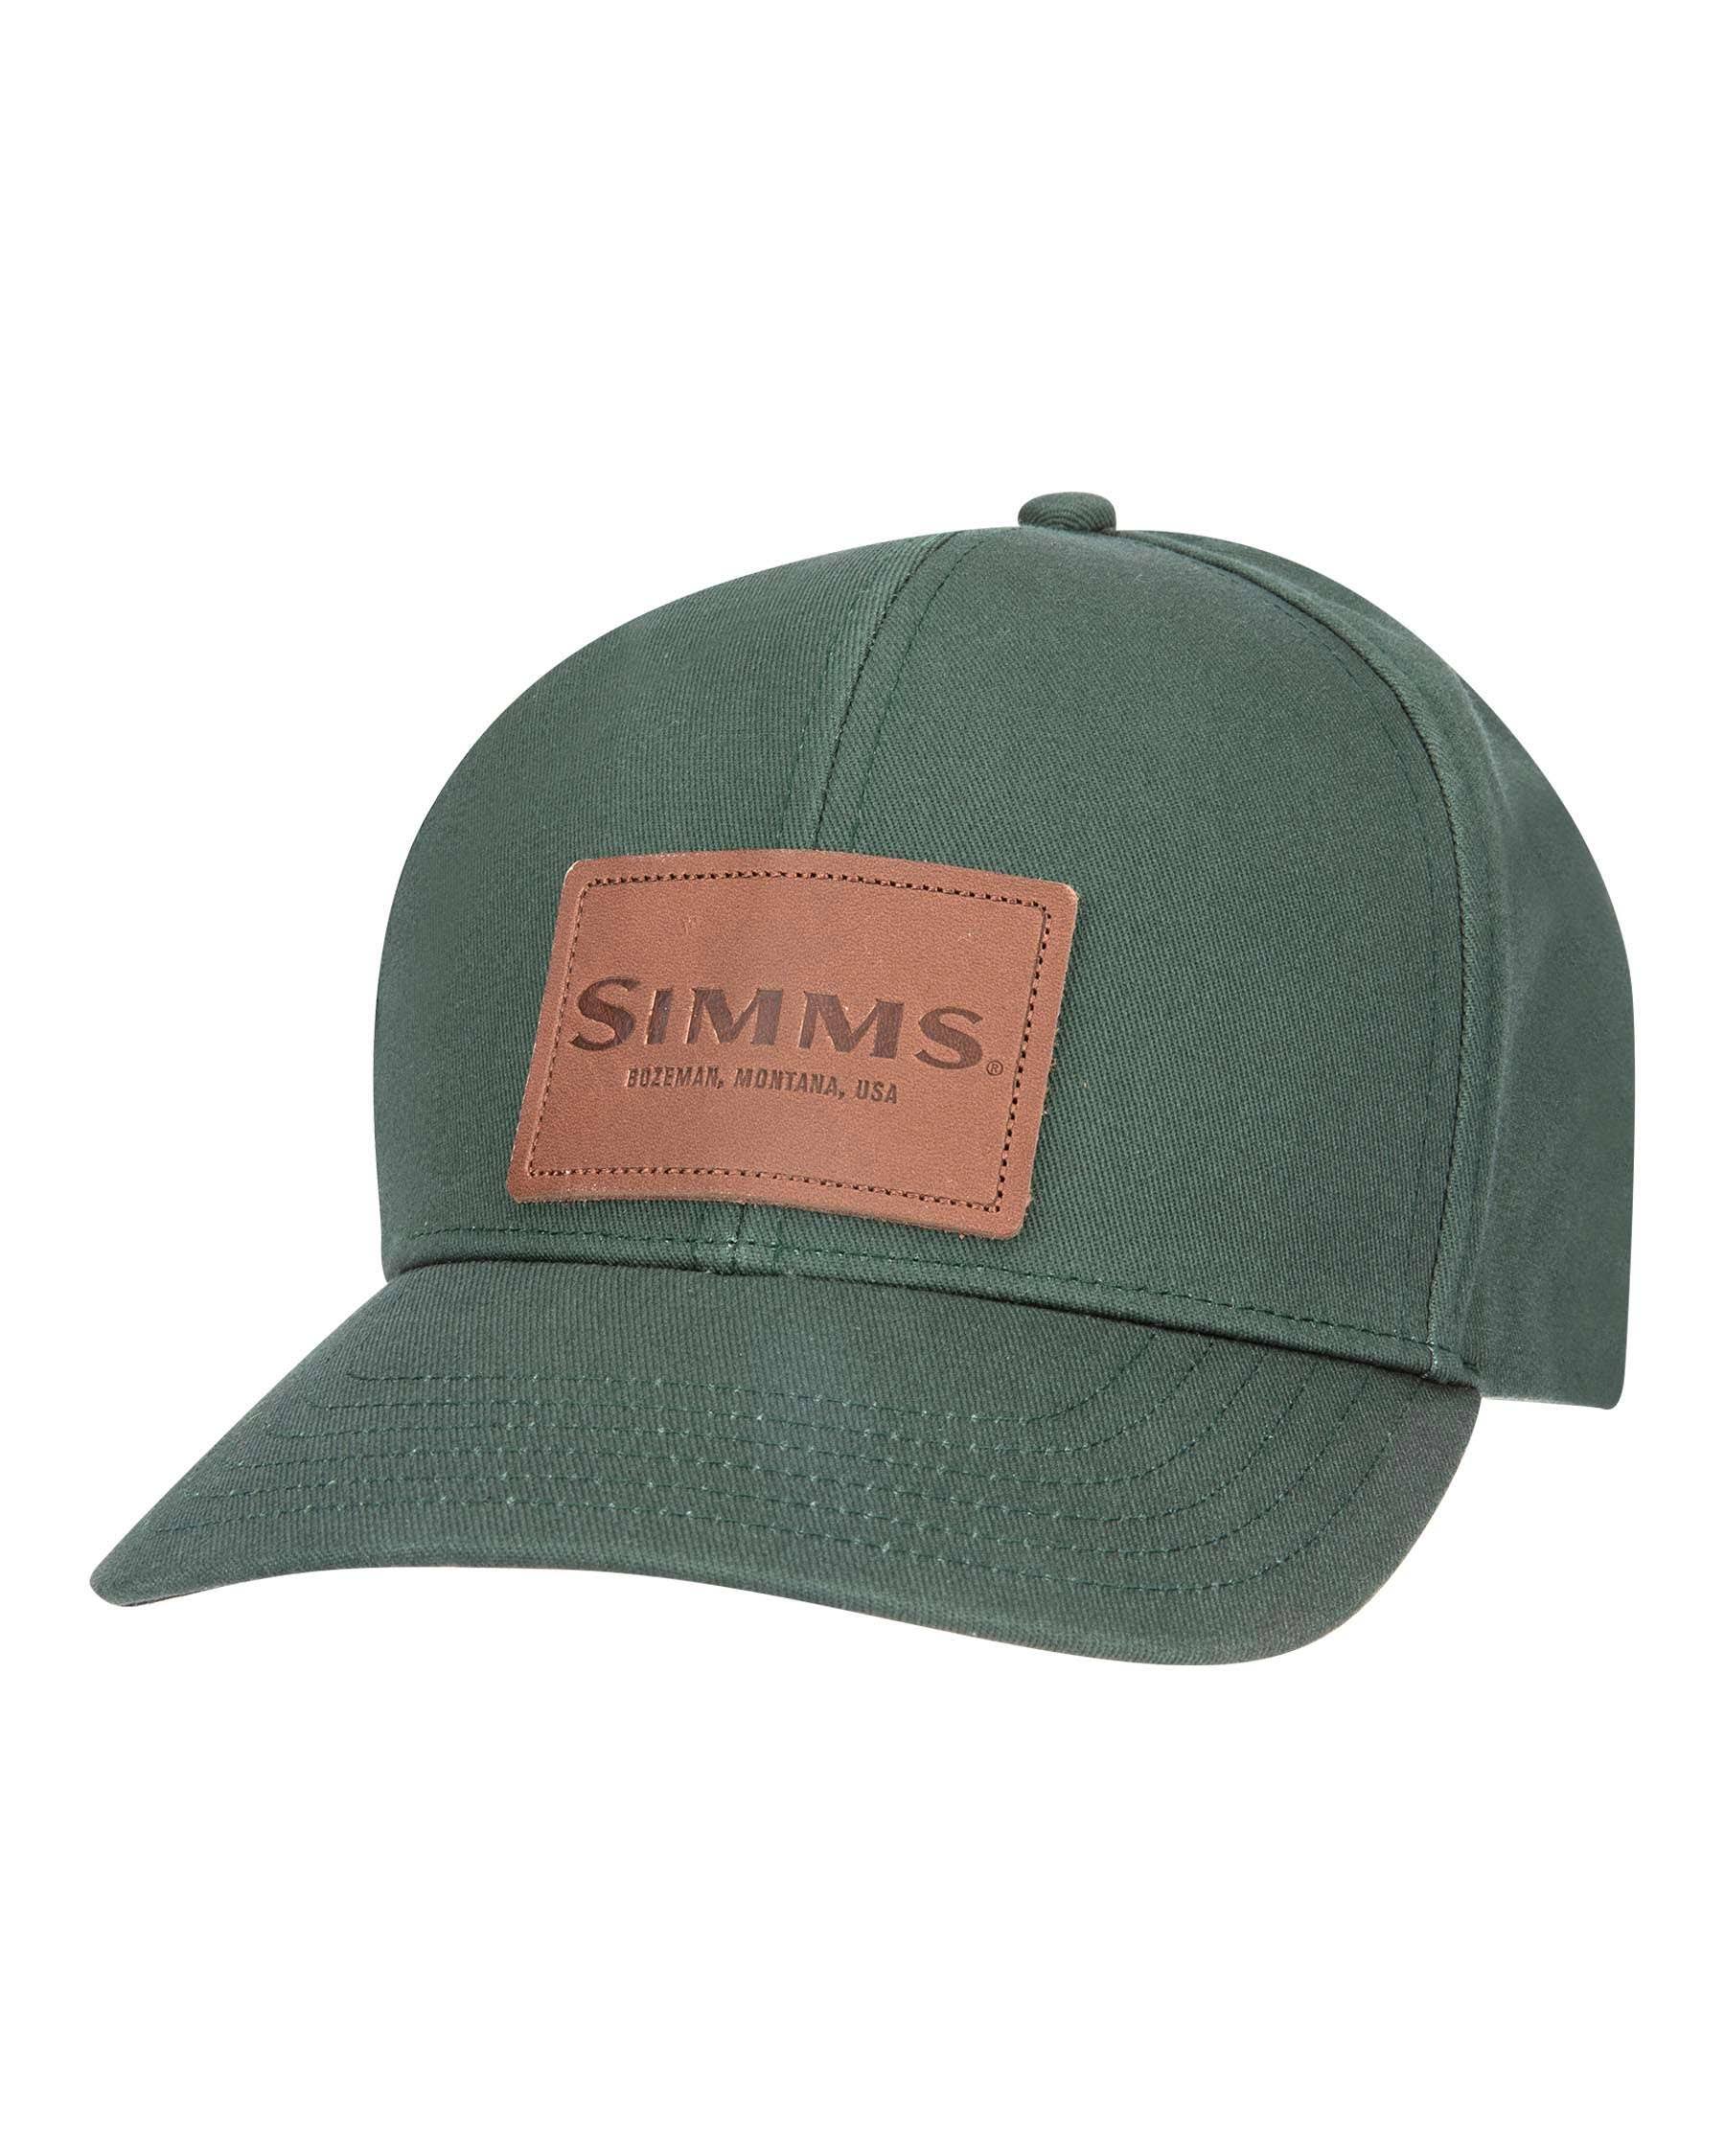 Simms Leather Patch Cap - Foliage